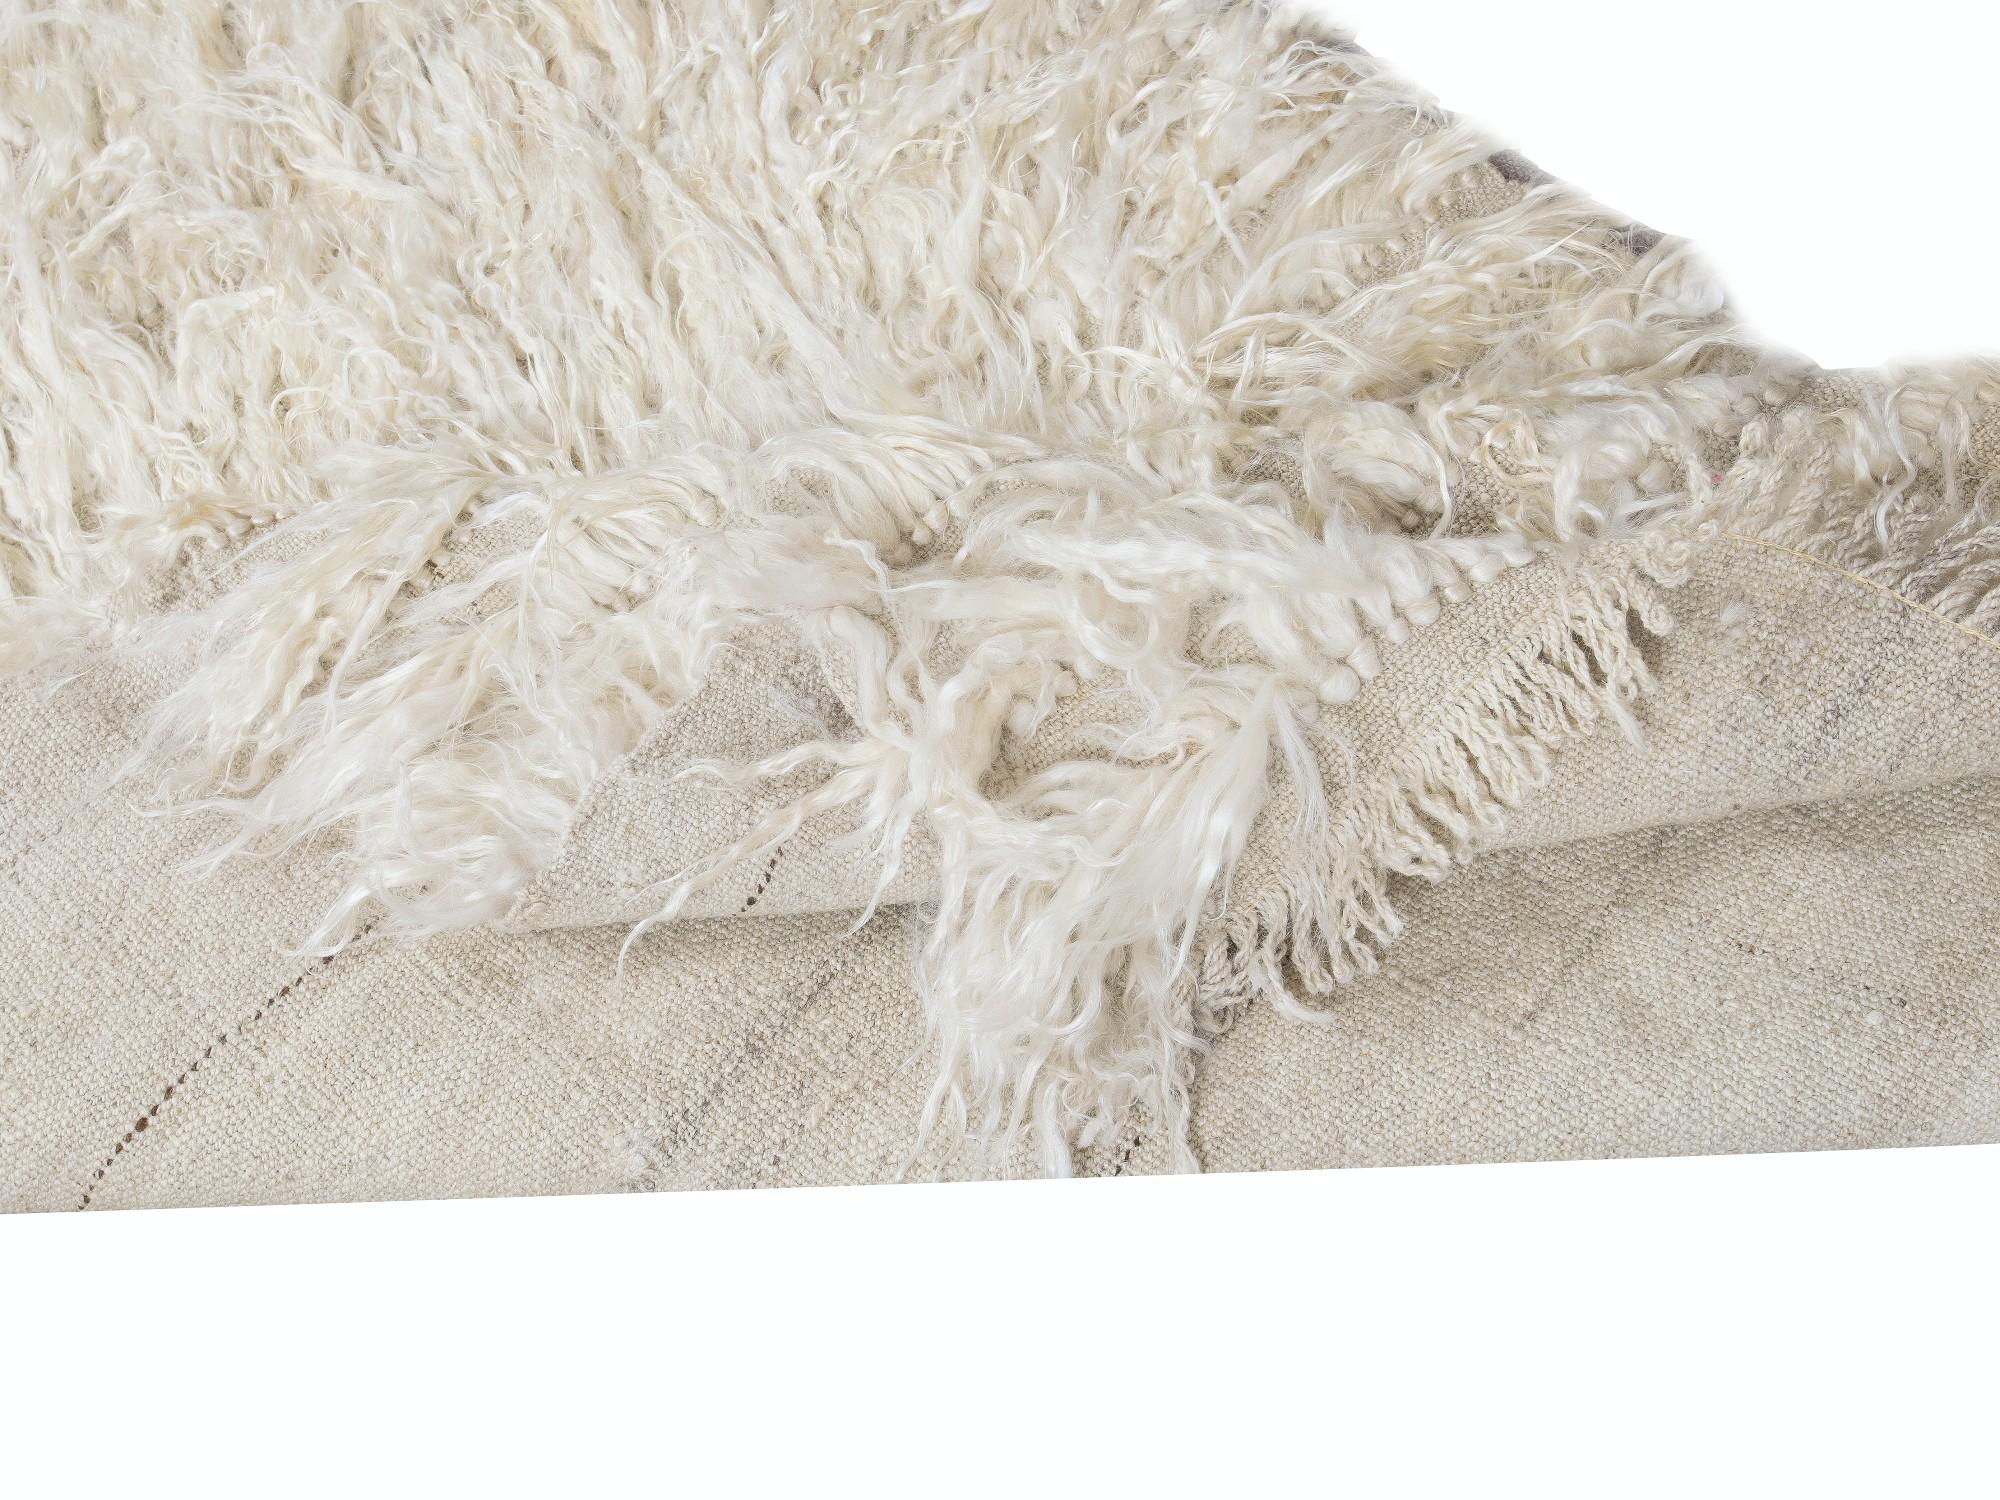 A vintage hand-knotted shag pile runner rug made of natural undyed mohair derived from local “Angora Goats” that are famous for their soft, lustrous long fleece. A true testament to Anatolian craftsmanship, this rug brings together the softness of